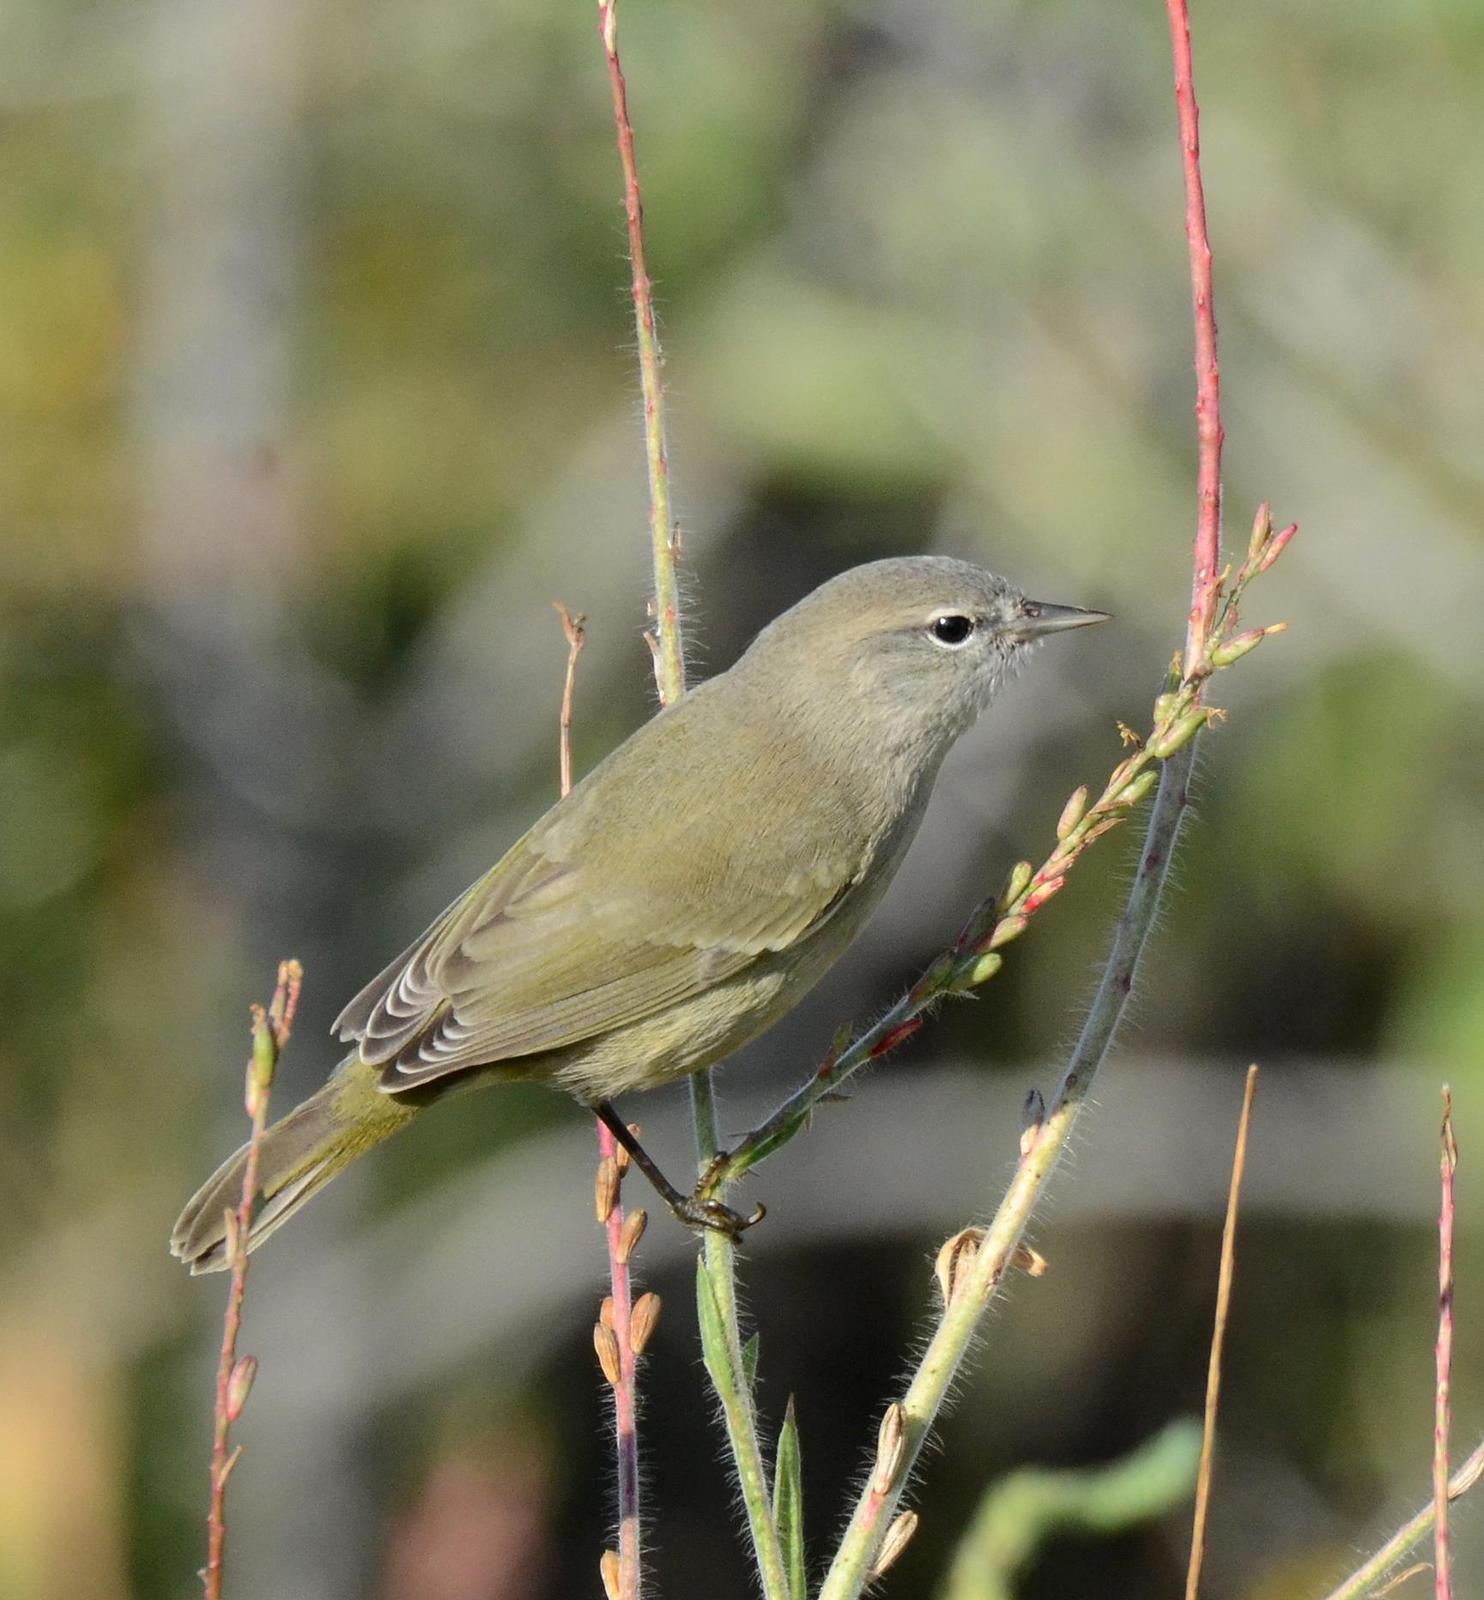 Orange-crowned Warbler Photo by Steven Mlodinow